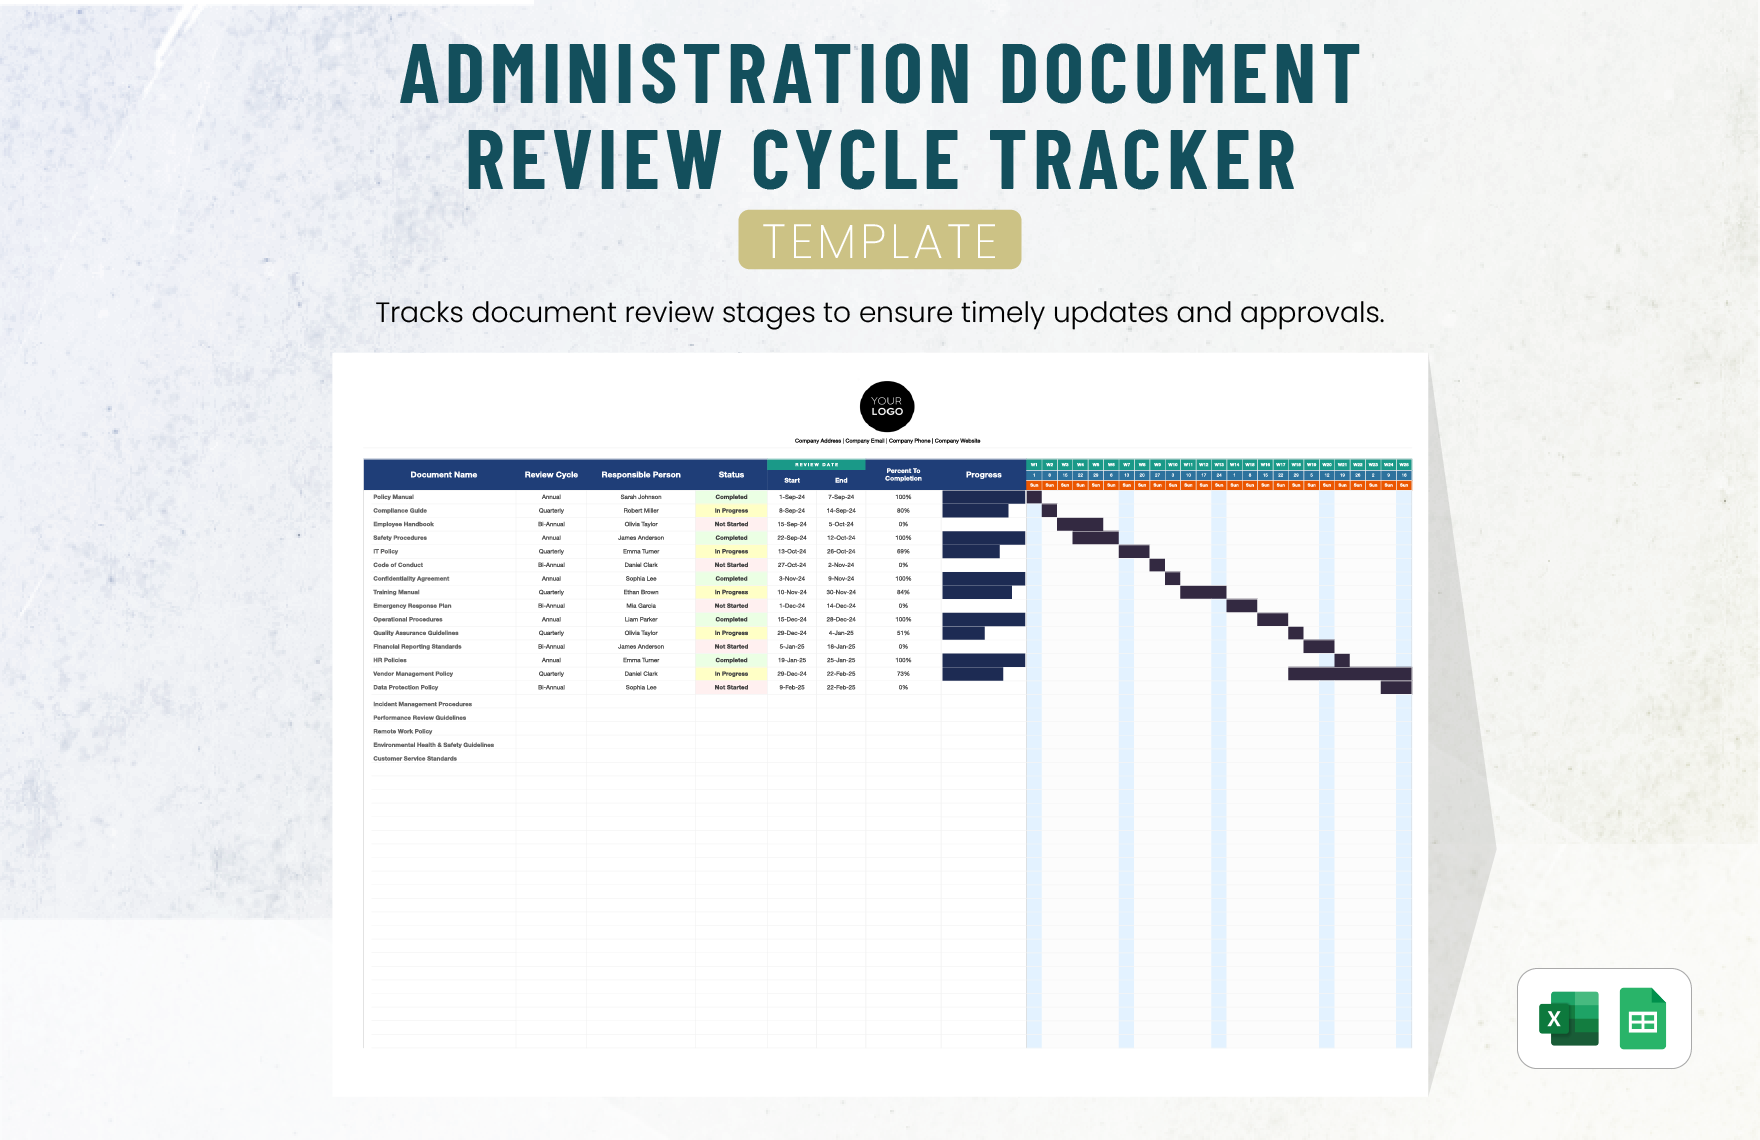 Administration Document Review Cycle Tracker Template in Excel, Google Sheets